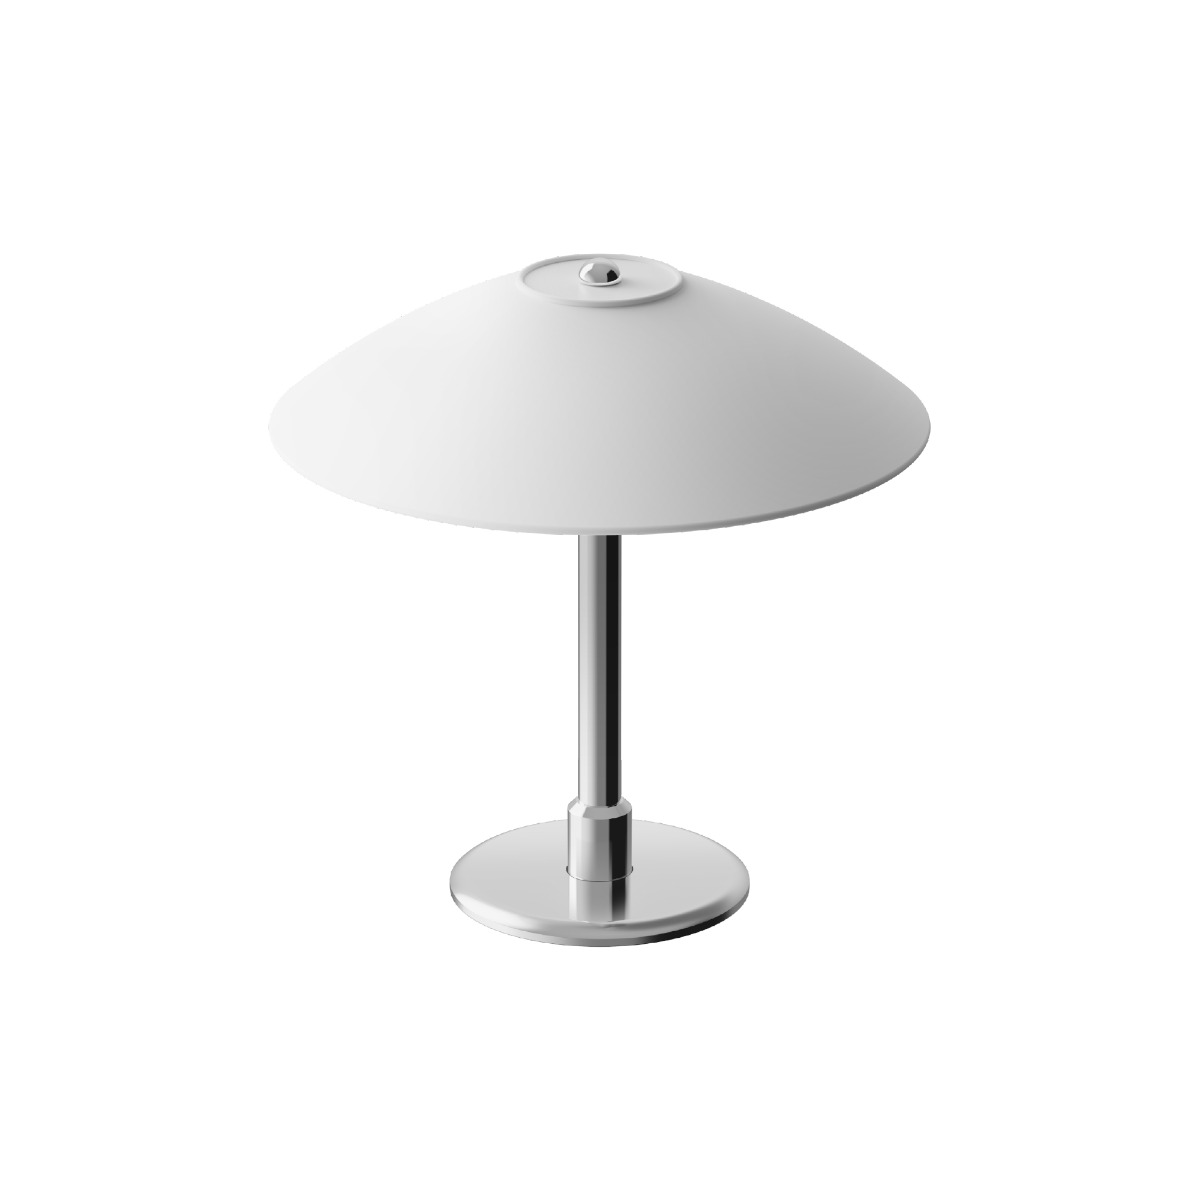 ilkwang Lighting SWAN2 Table Stand ODENSE Edition (3Colors)